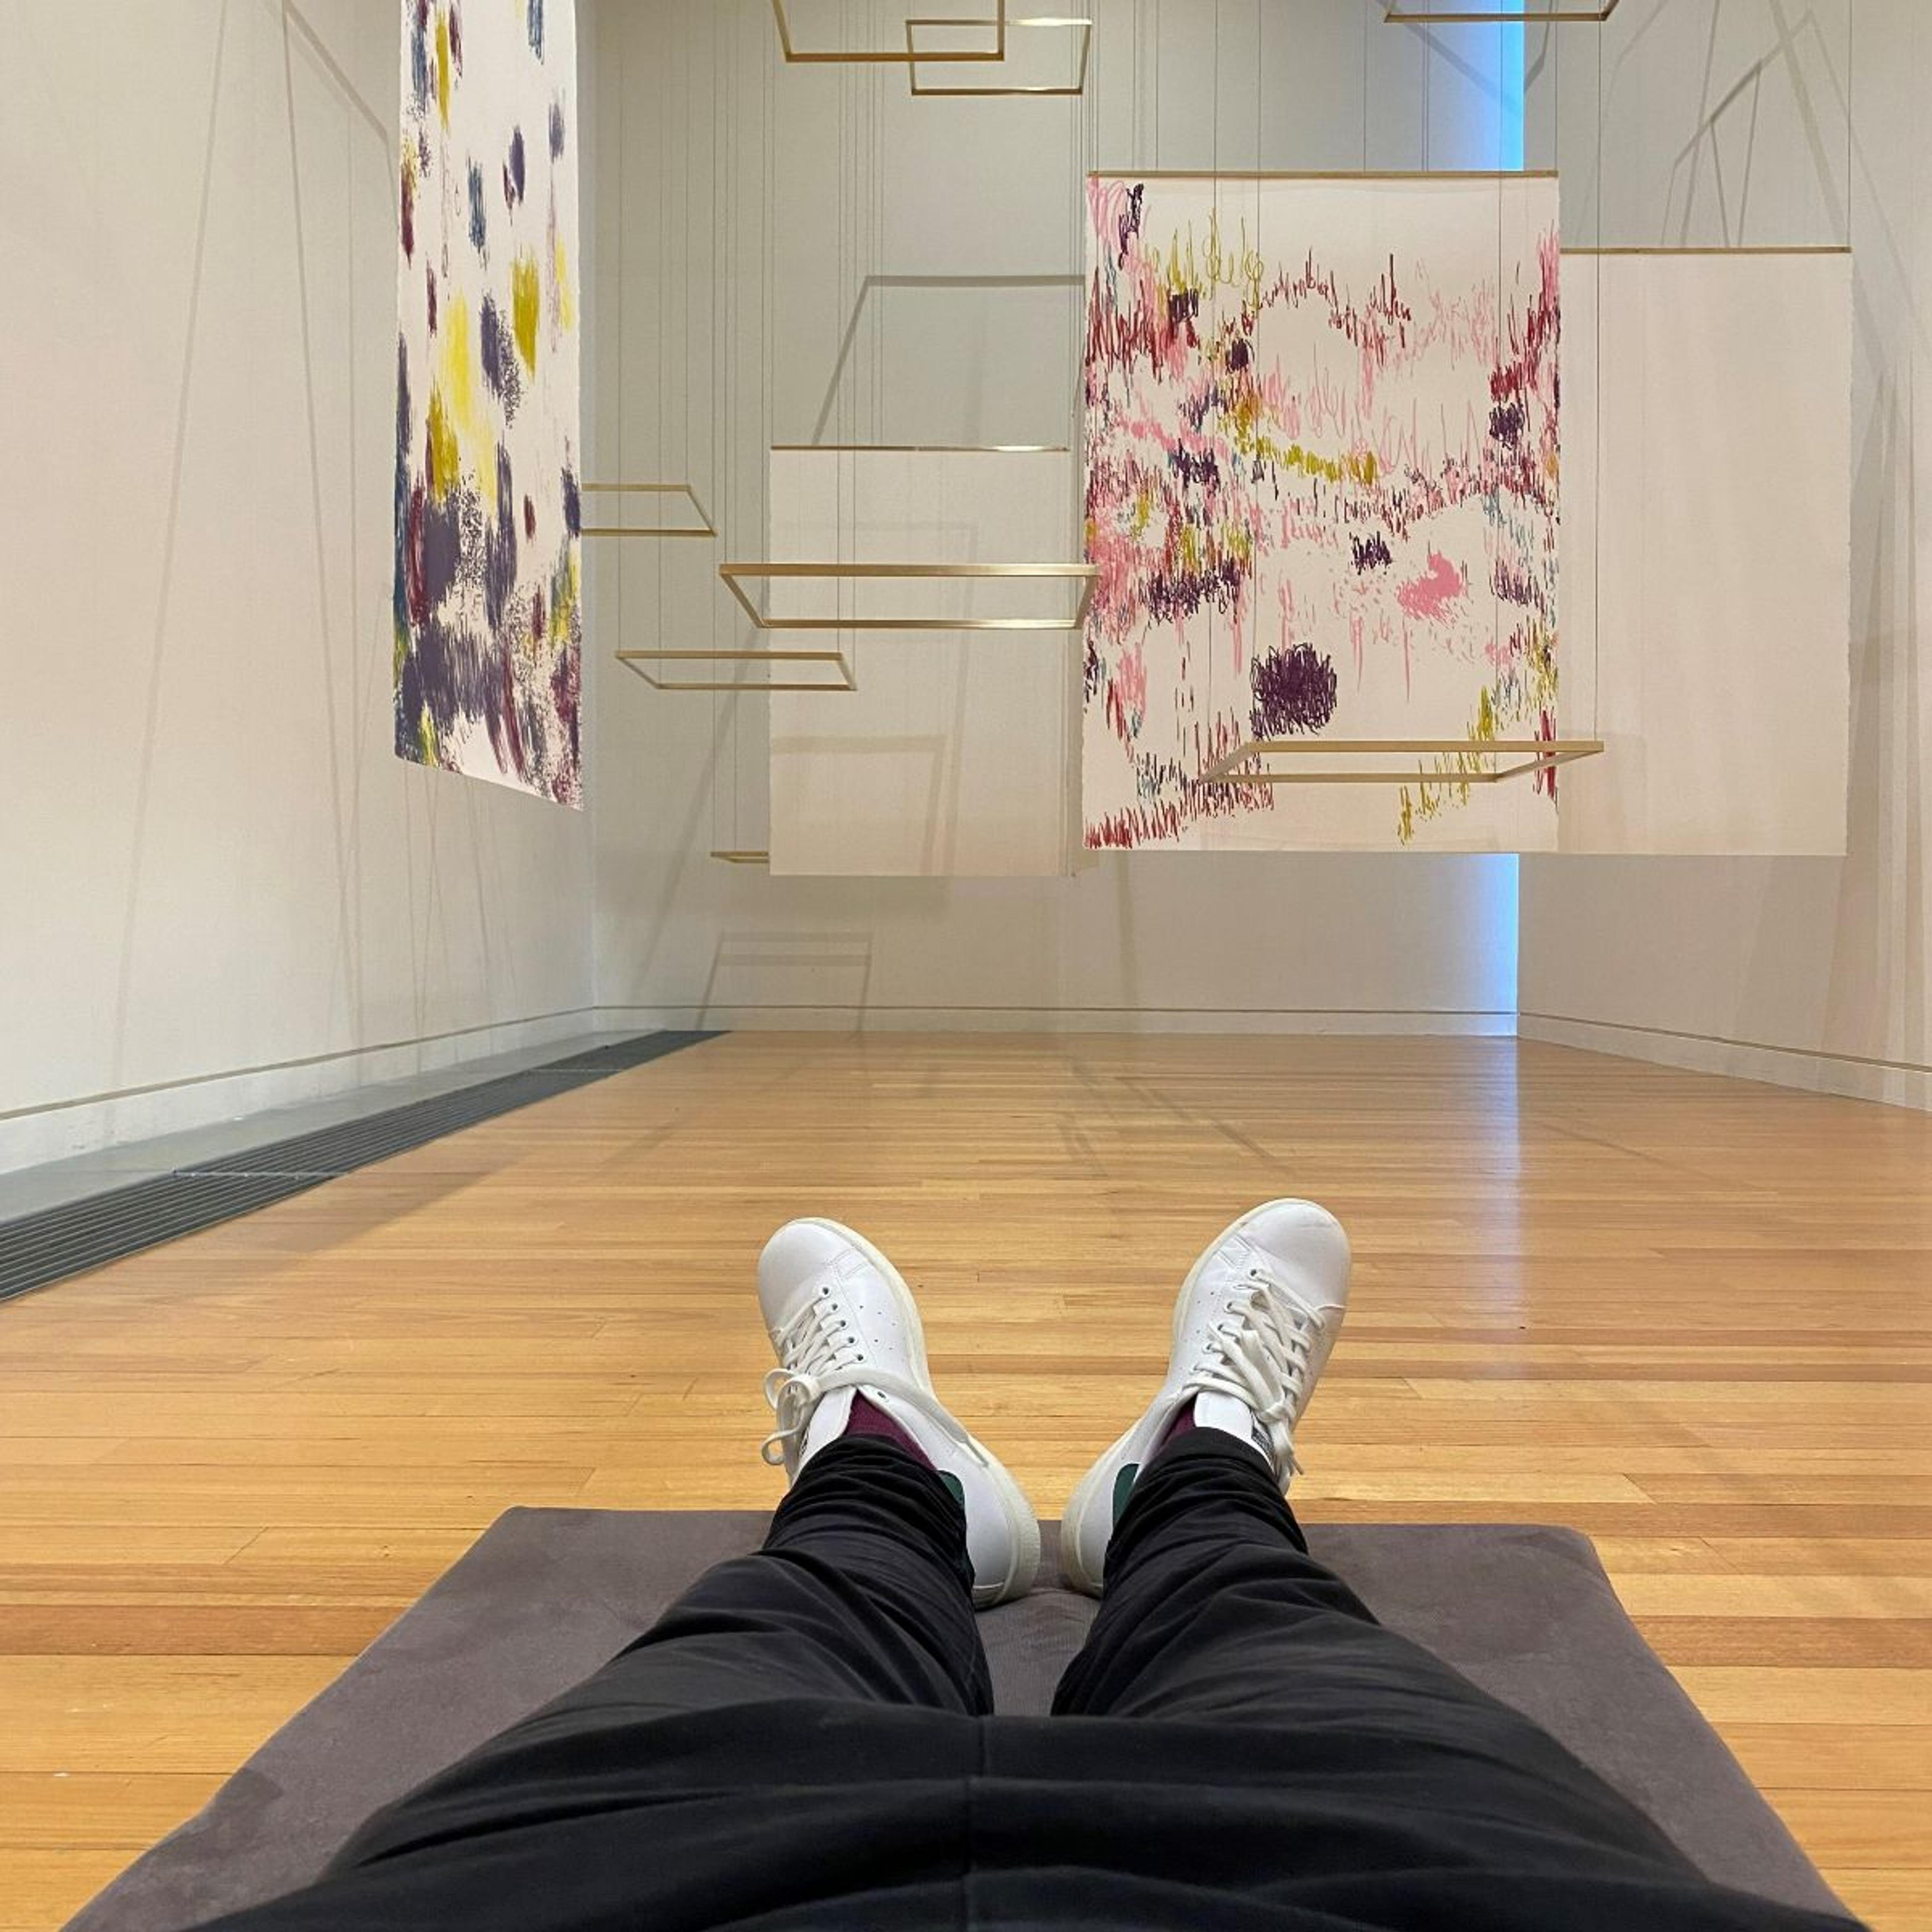 Person laying down on the floor underneath colourful drawings and brass frames hanging above